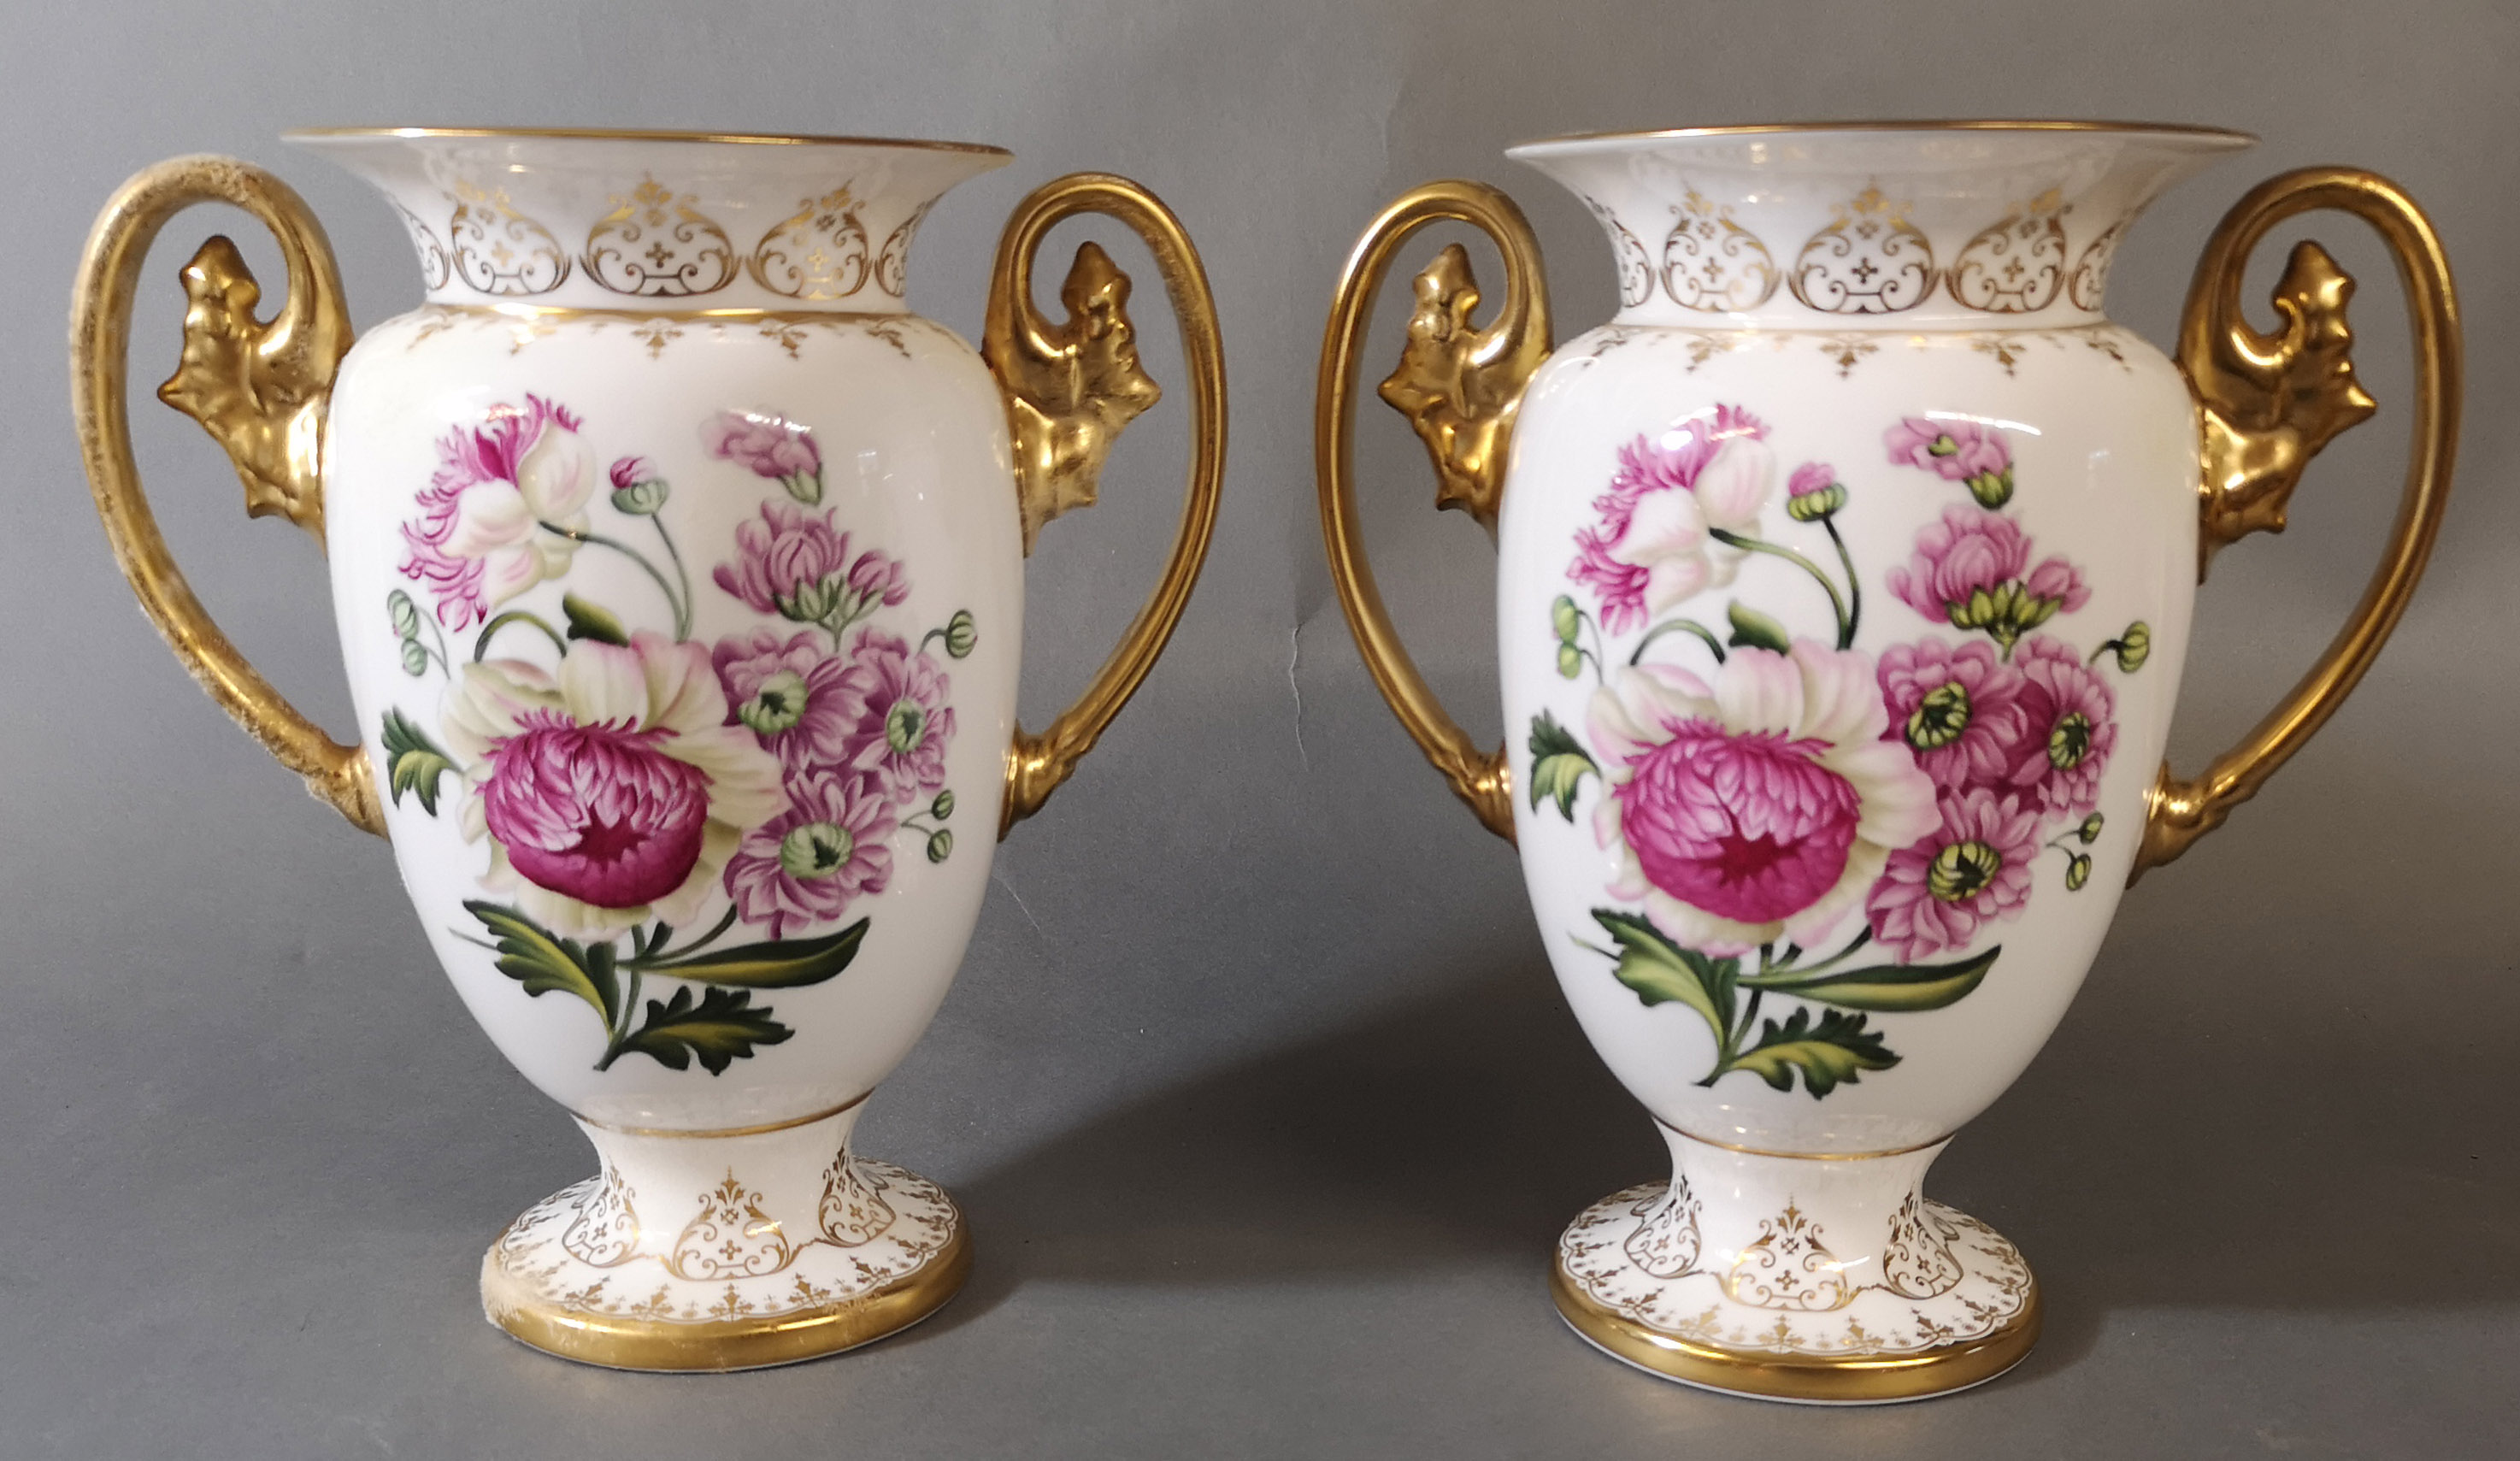 SPODE, 'THE FRENCH JAR', A PAIR OF LIMITED EDITION 200TH ANNIVERSARY PORCELAIN VASES Having twin